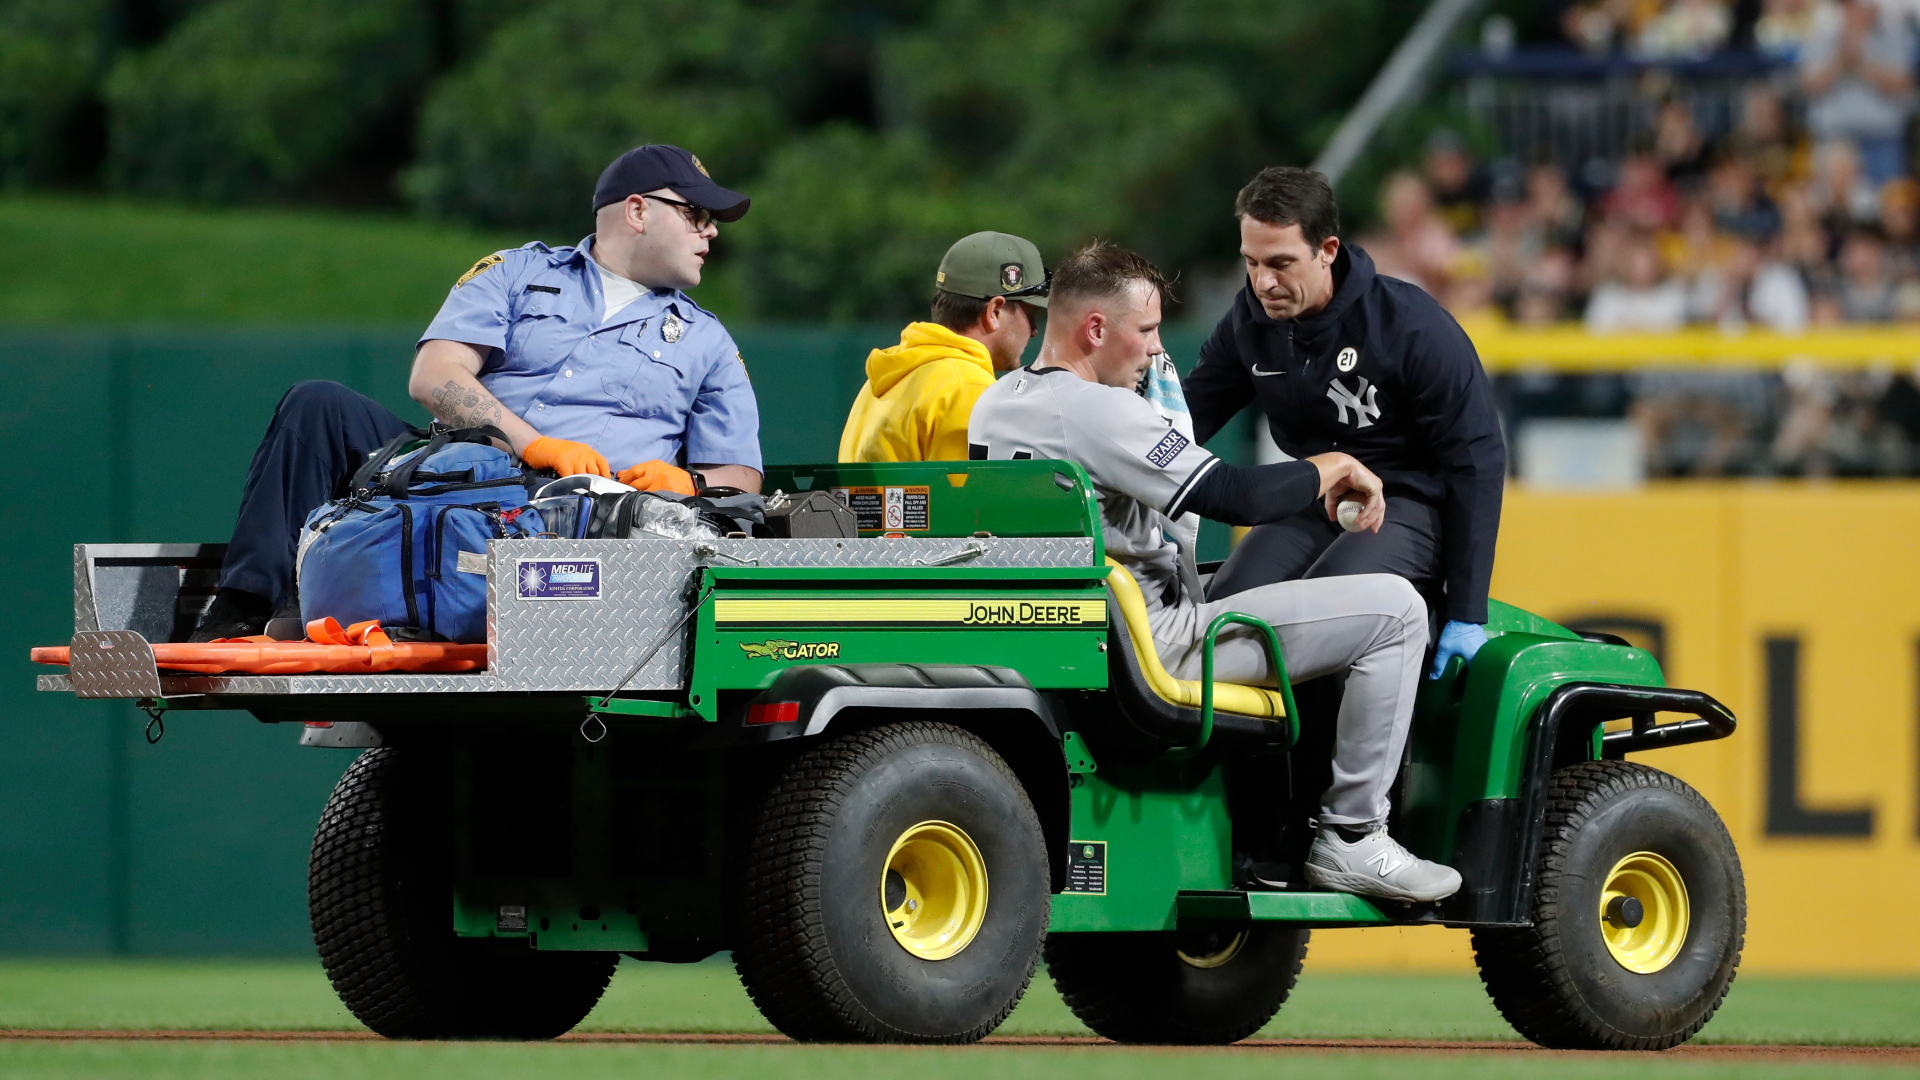 Yankees' Anthony Misiewicz hit in head with liner, carted off field